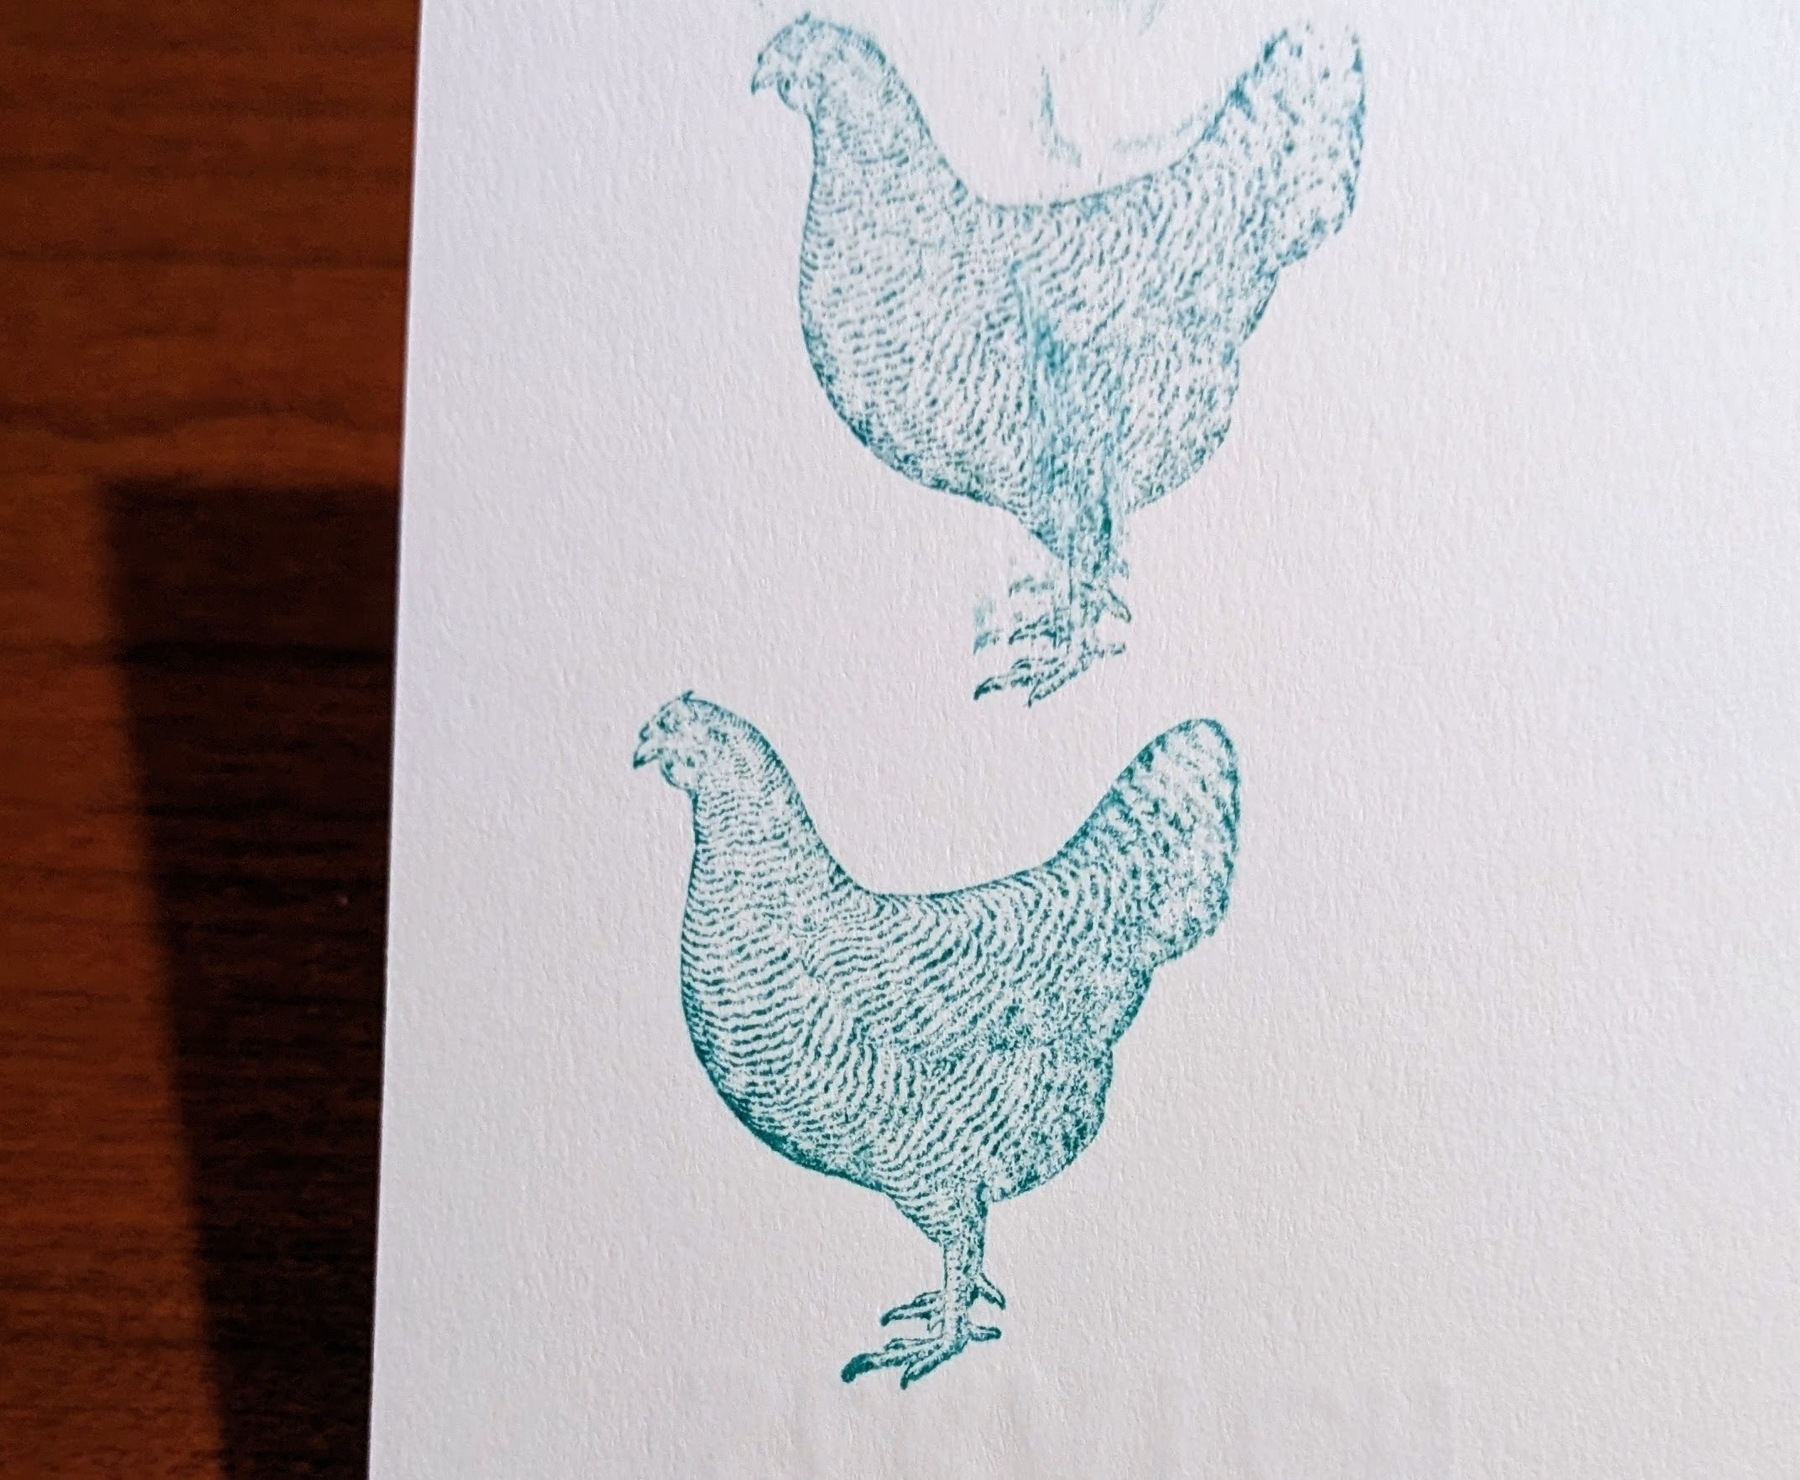 two stamped images of a detailed drawing of a hen with barred feathers